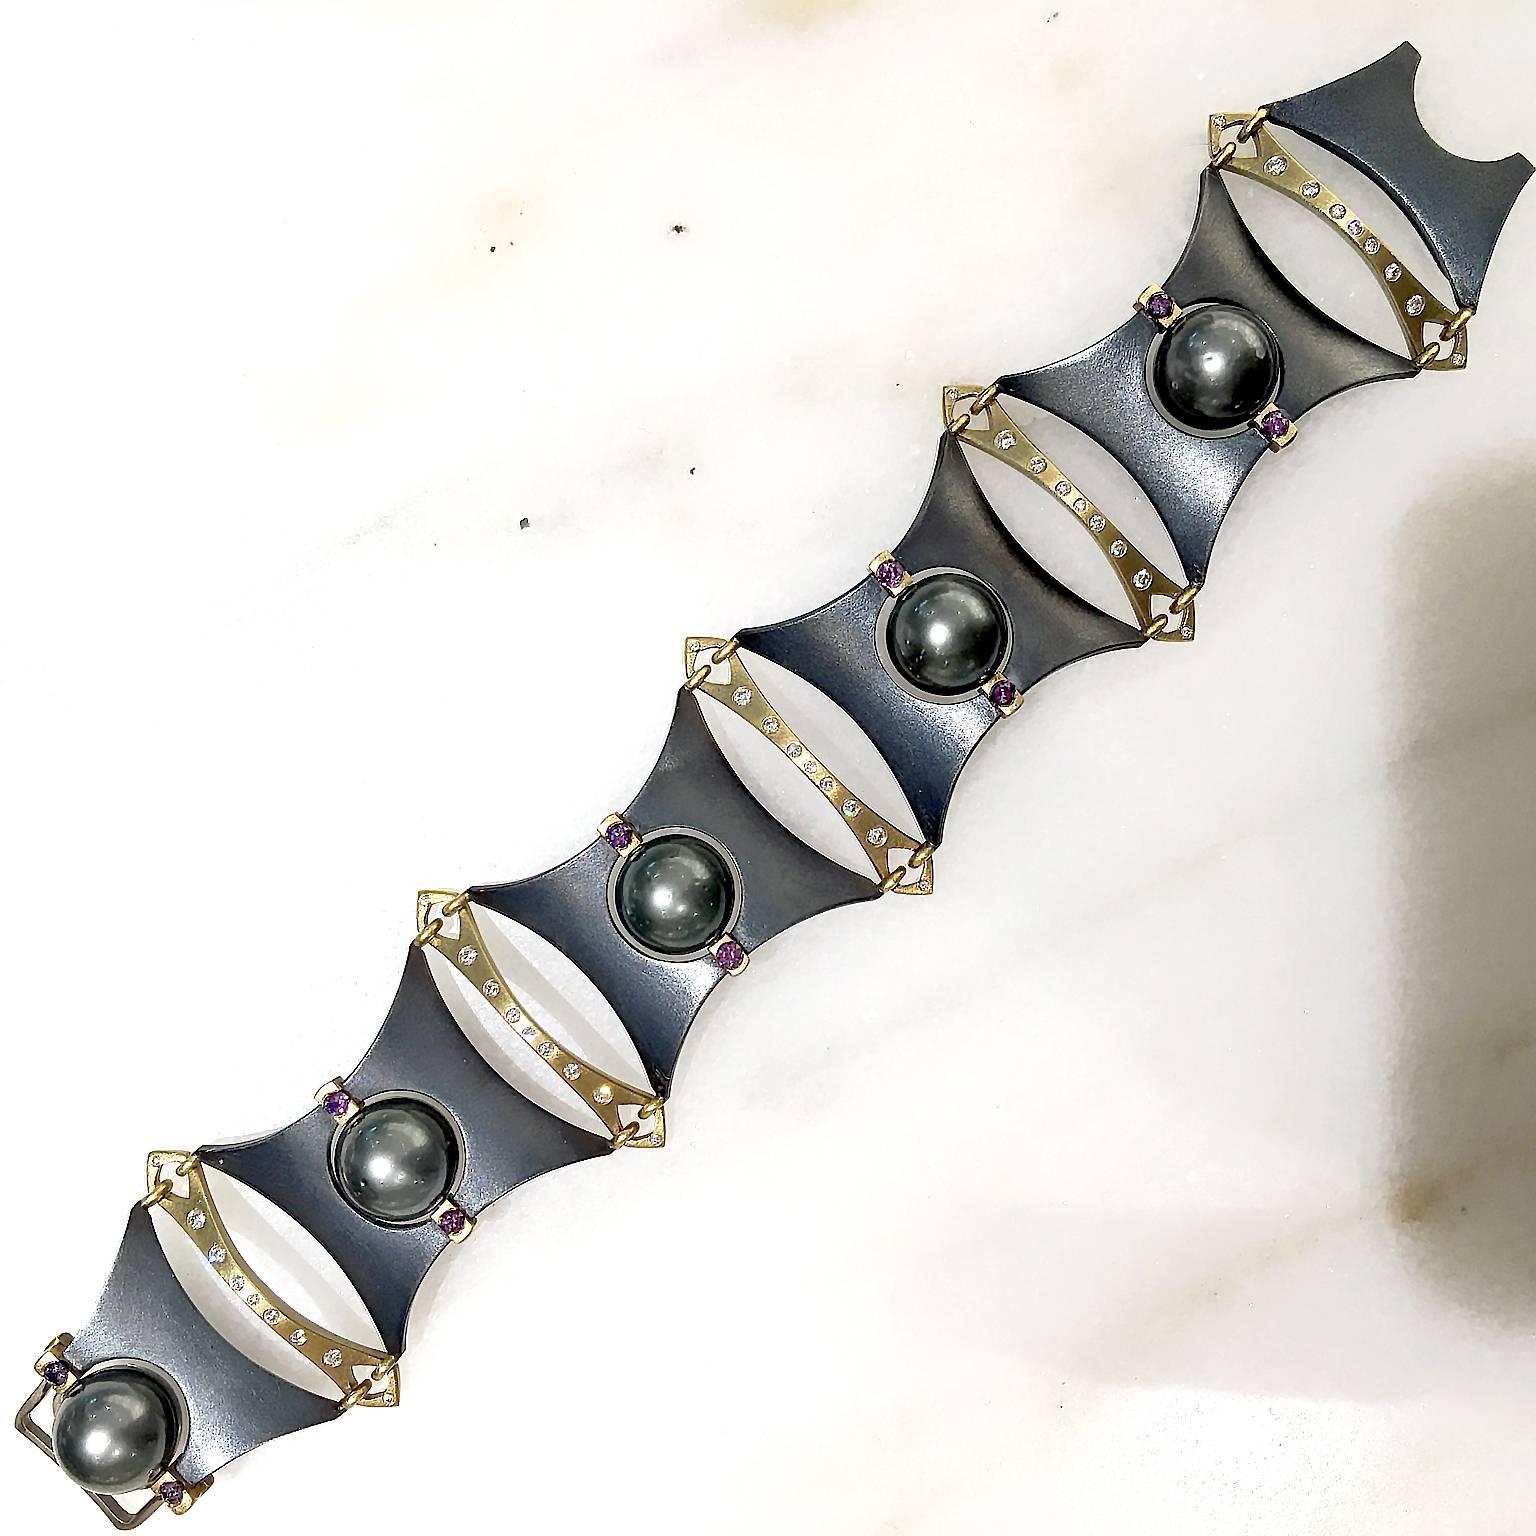 One of a Kind AXIS Bracelet handcrafted in matte finished 18k yellow gold and oxidized sterling silver by jewelry artist Robin Waynee. The intricate design features five 360 degree rotating 11.6mm Tahitian pearls, each flanked by two spectacular